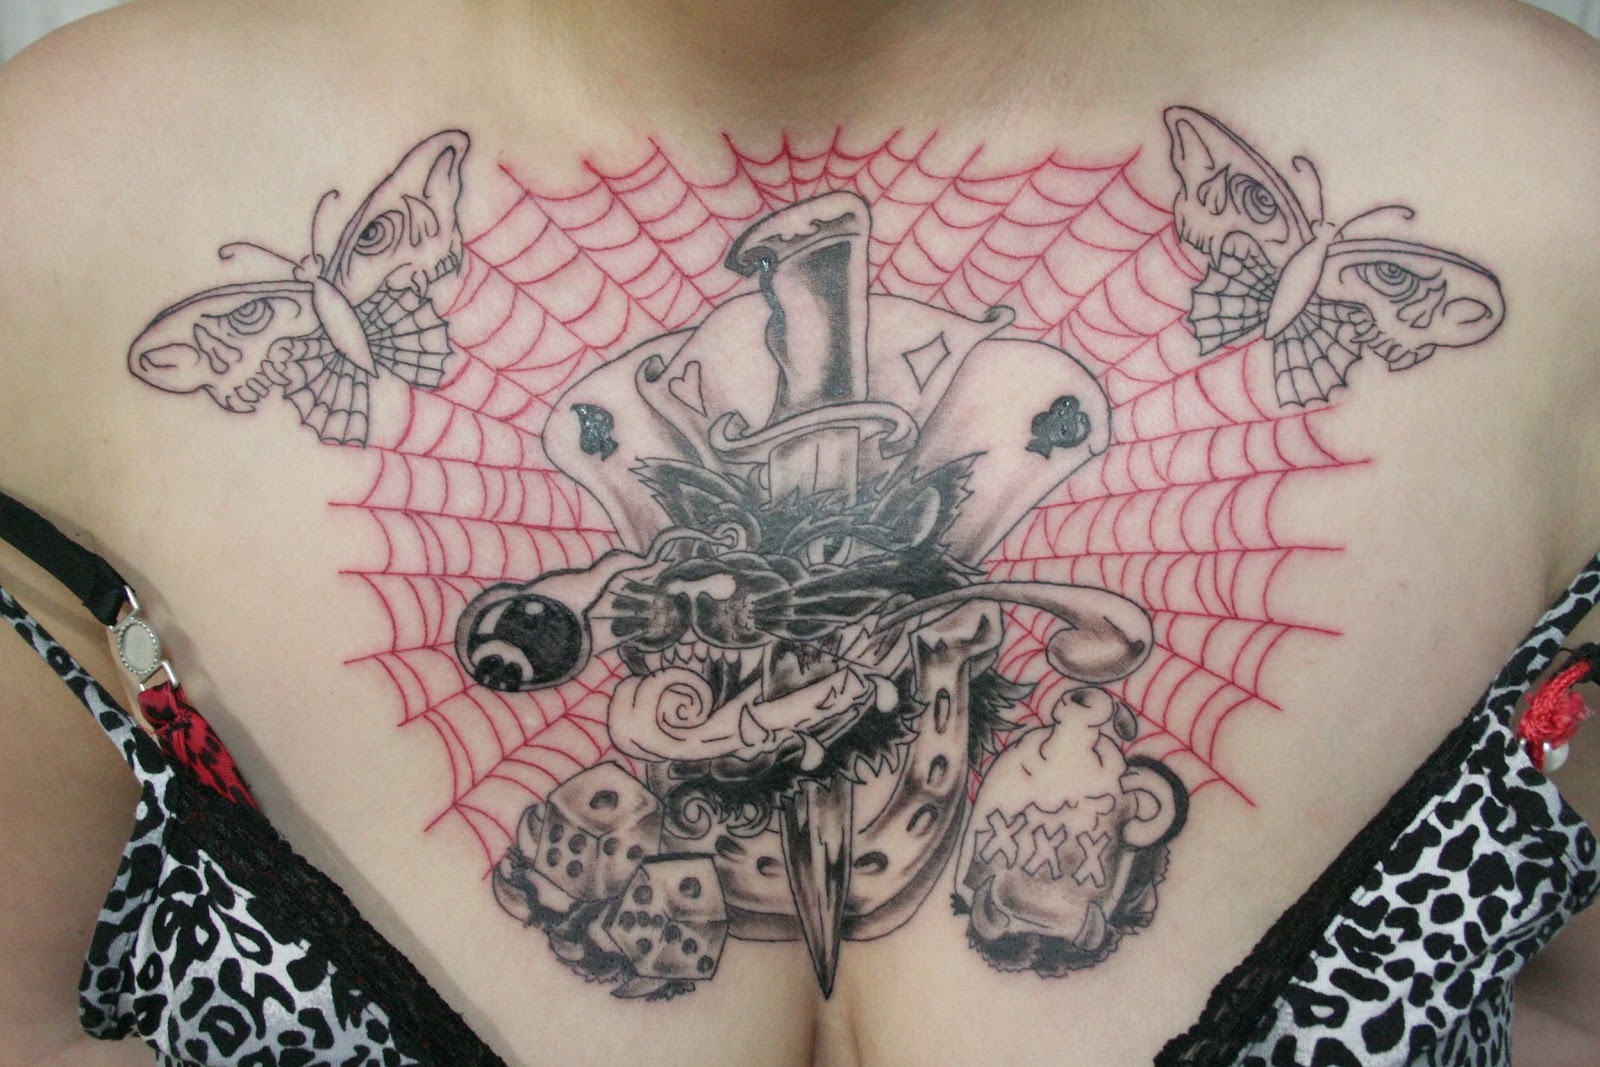 Spider Web Tattoos Designs Ideas And Meaning Tattoos For You throughout dimensions 1600 X 1067